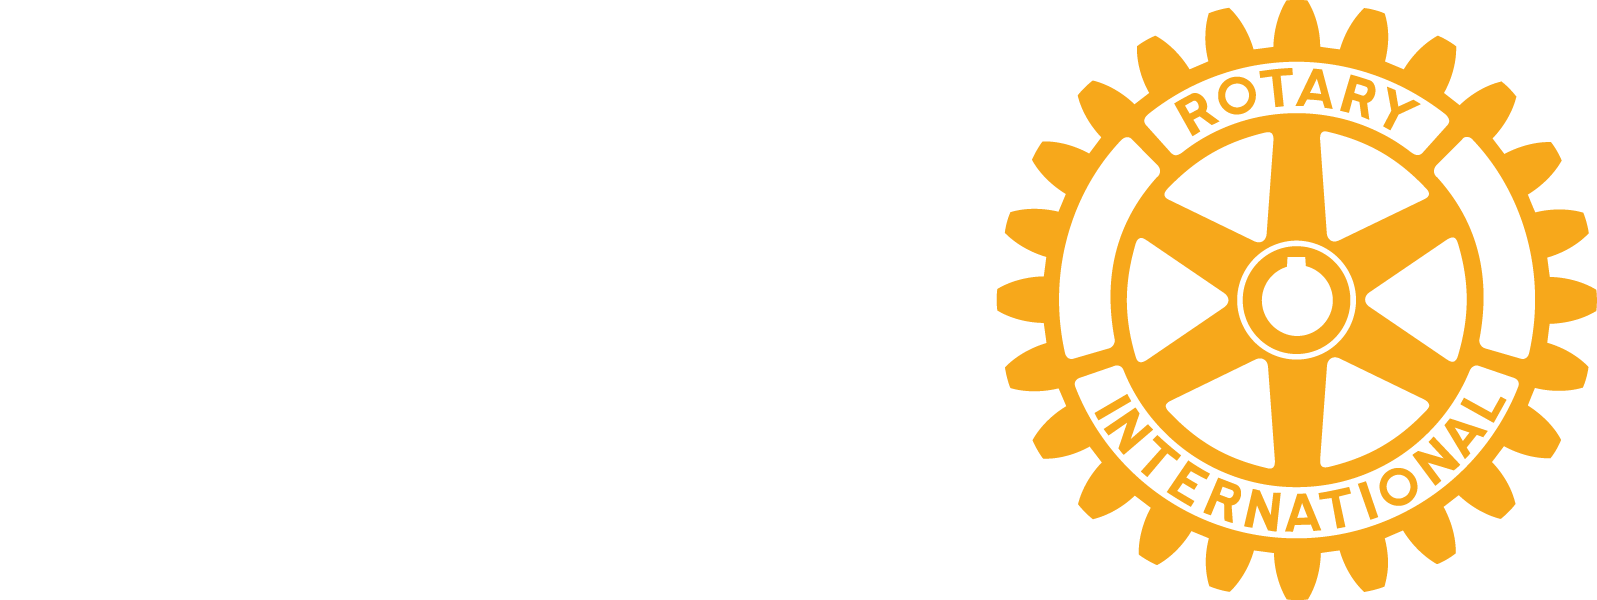 ROTARYlogo001wh.png